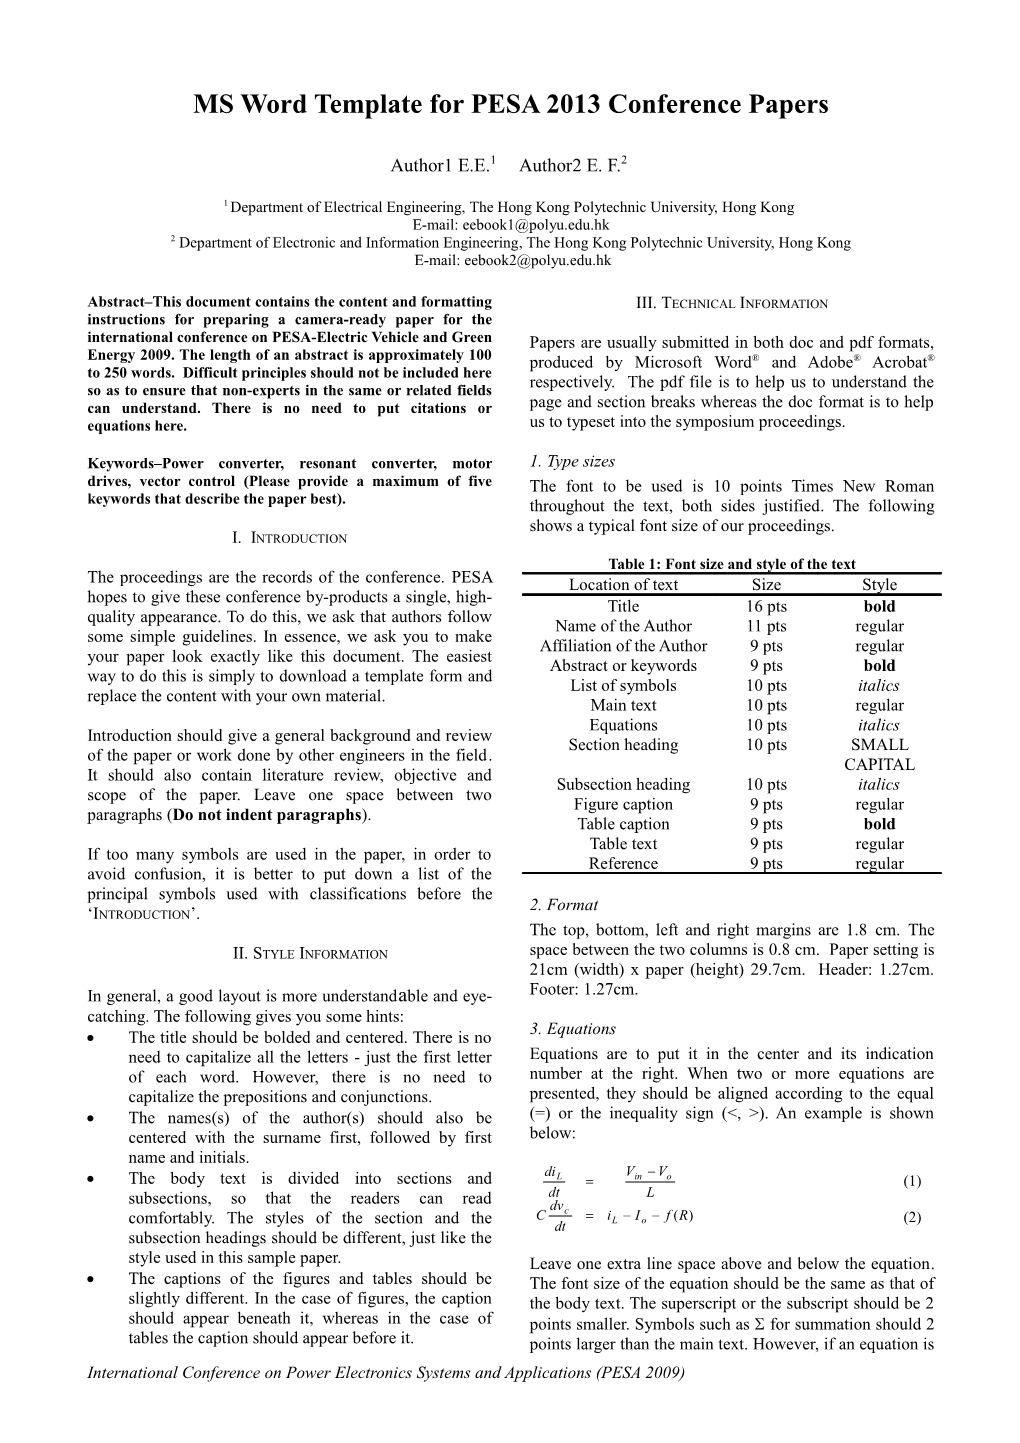 Guidelines for Preparation a Two-Column Paper for an Engineering Journal